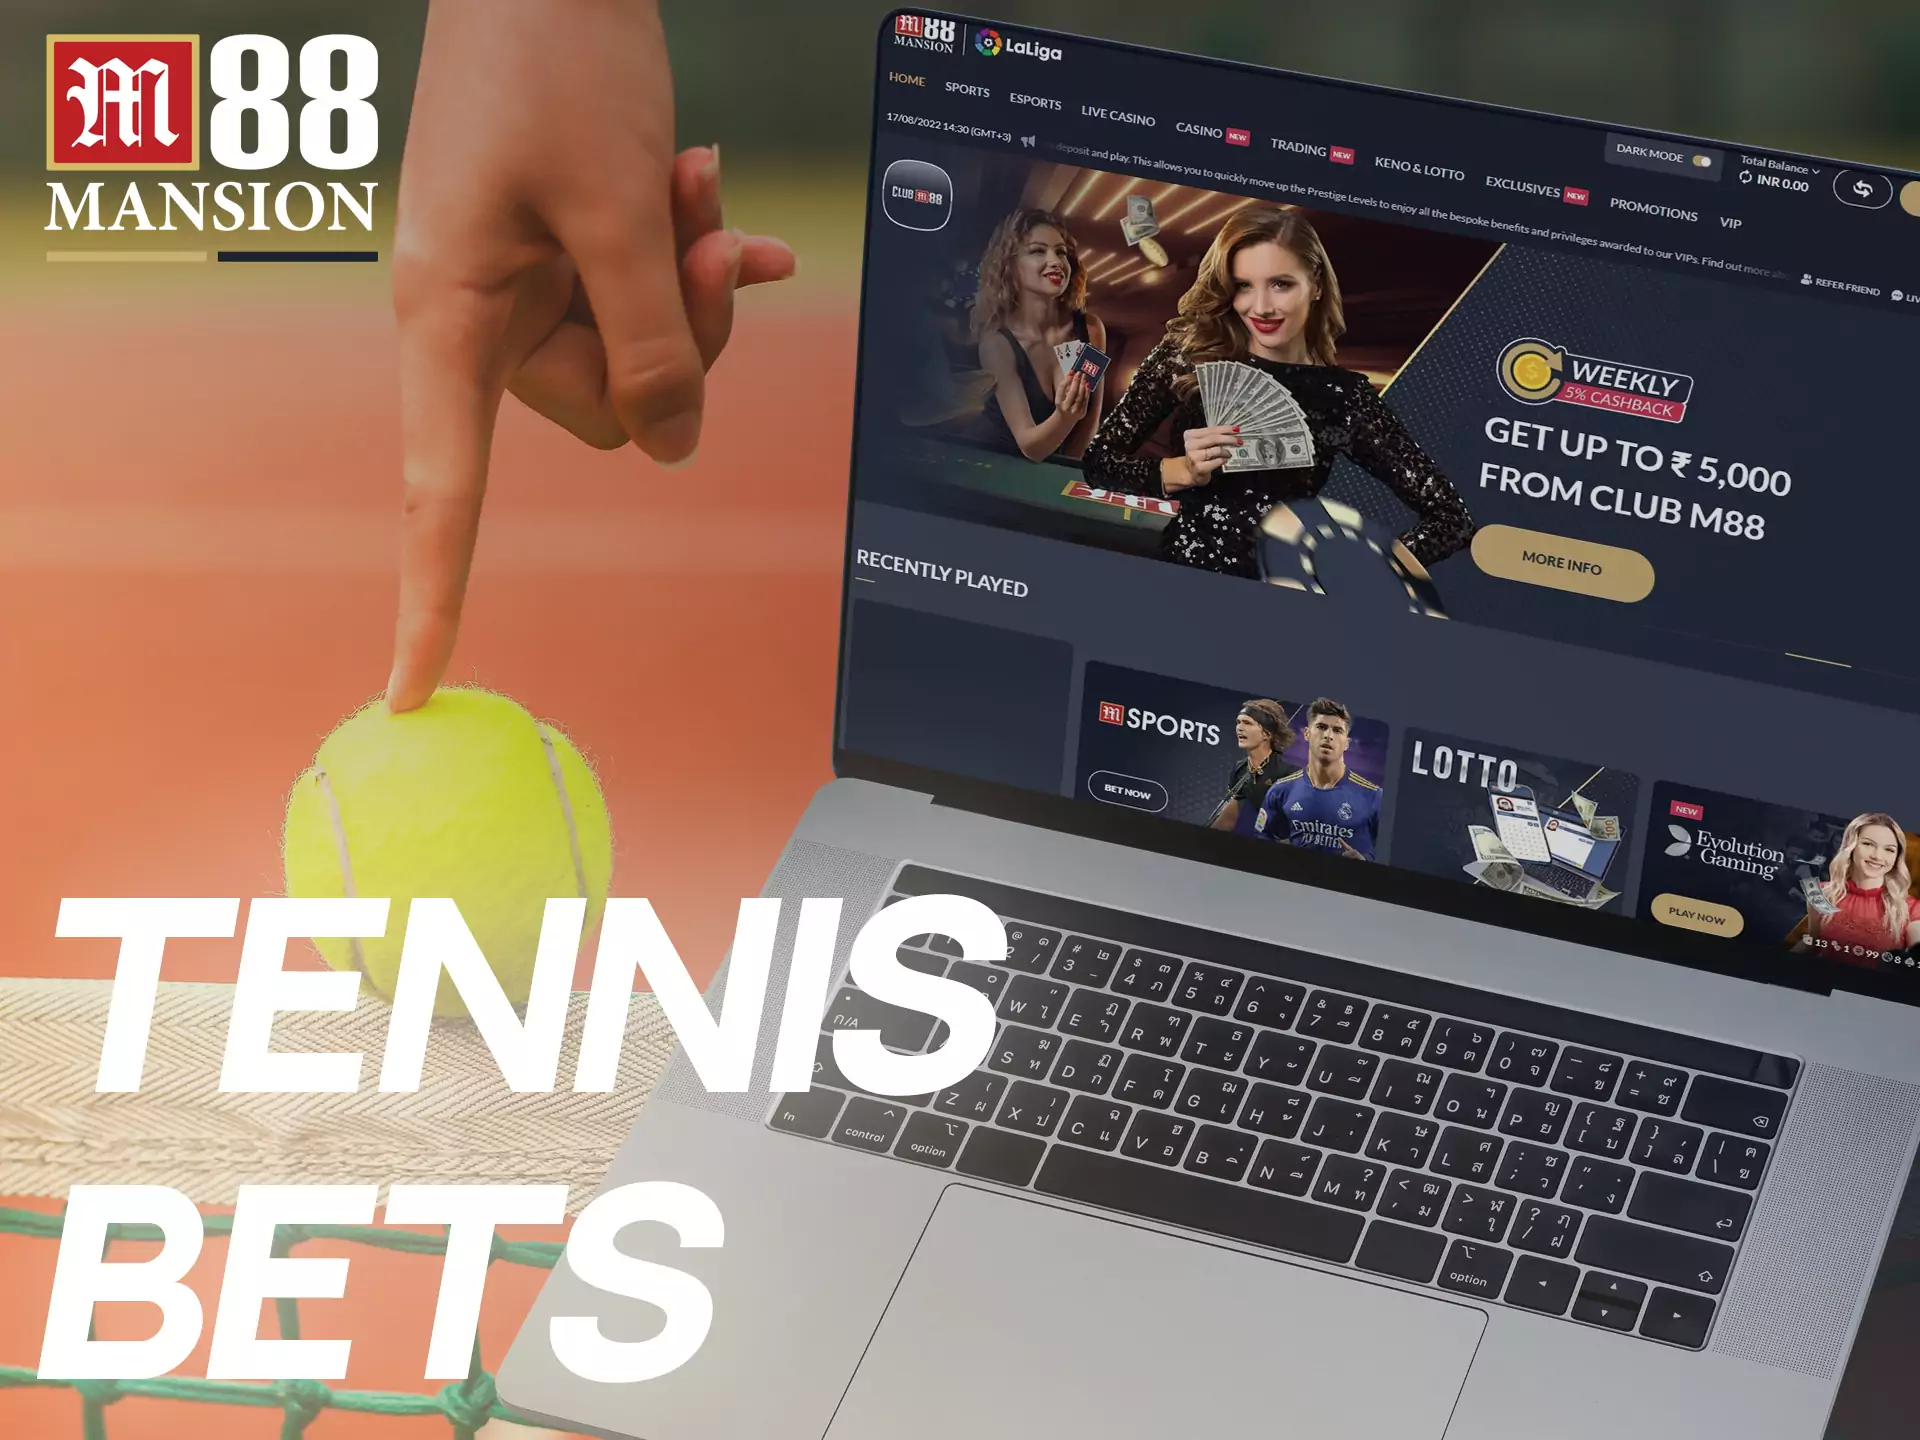 Tennis matches are in the M88 sportsbook as well.